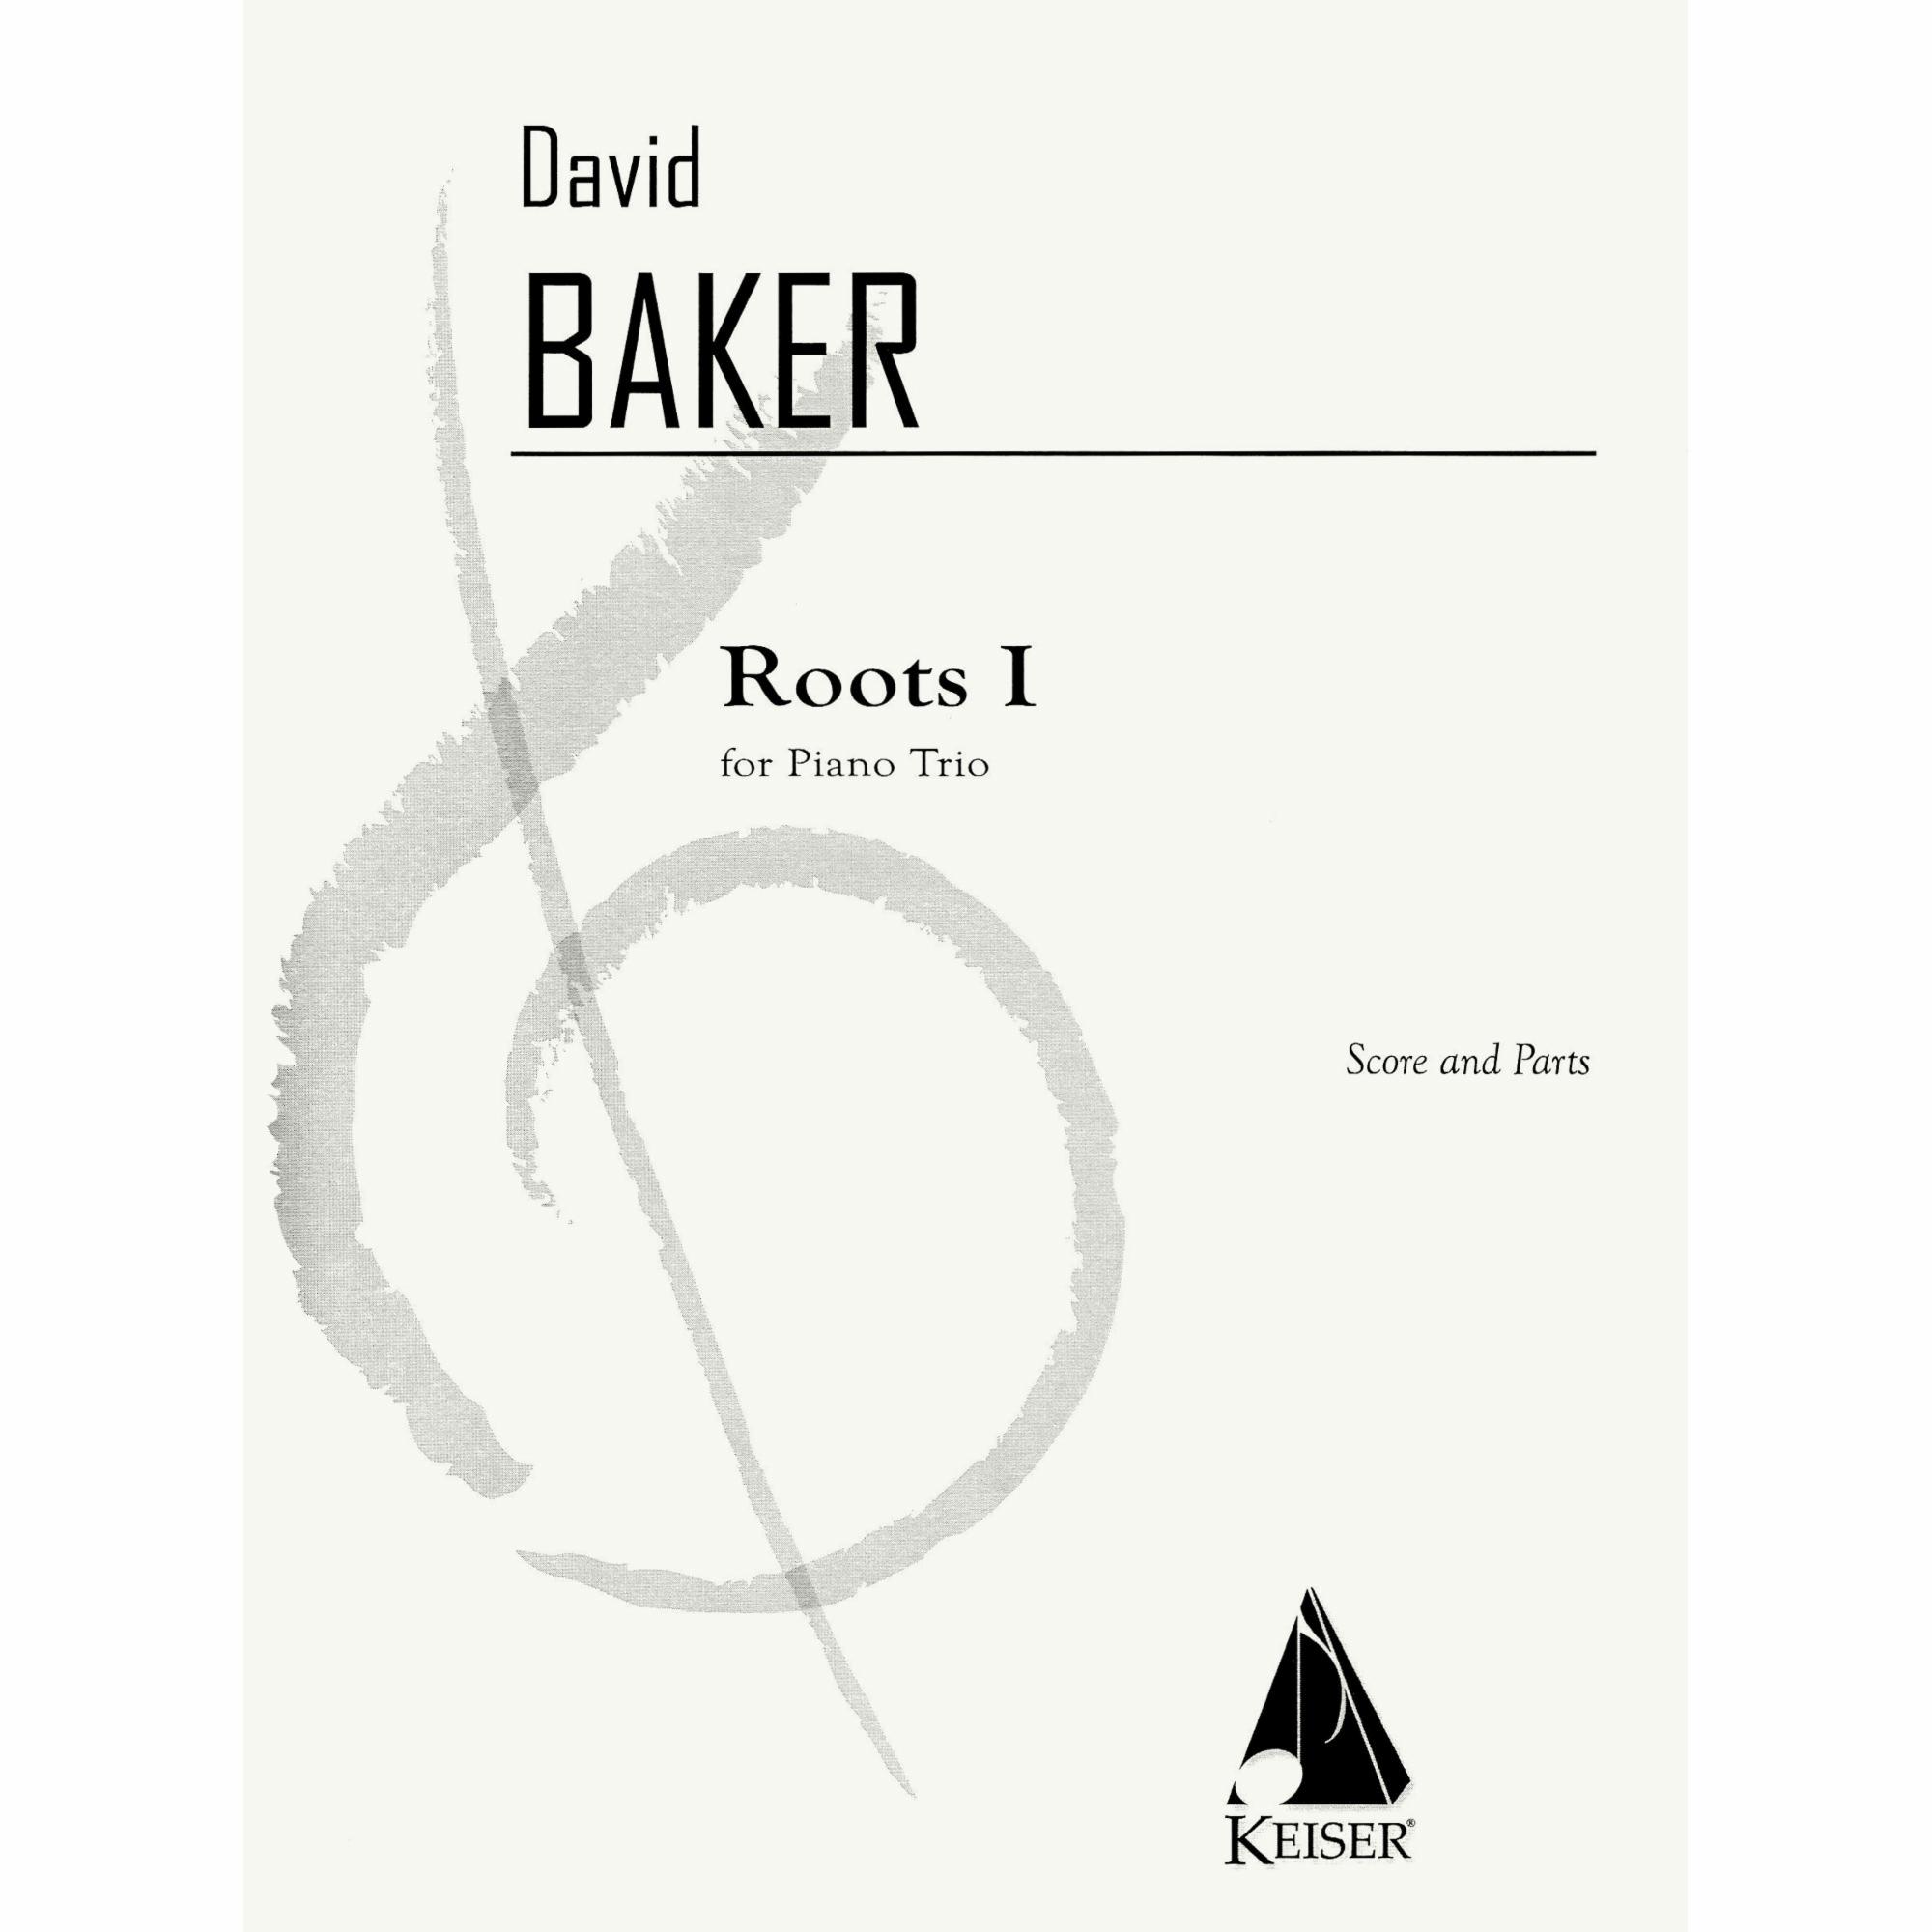 Baker -- Roots I for Piano Trio